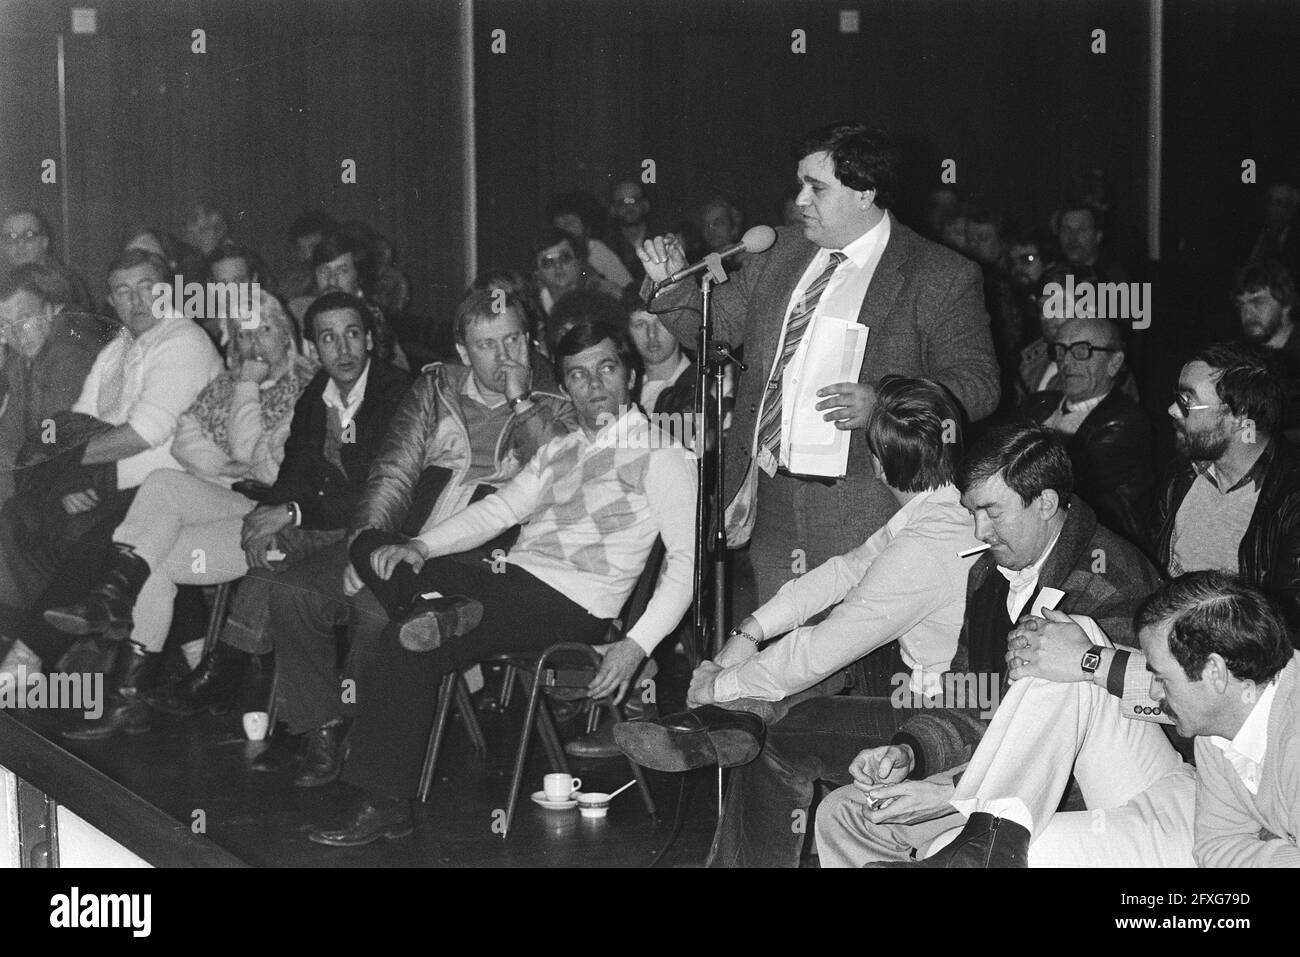 Meeting of Drivers, March 3, 1983, labor disputes, cab drivers, The Netherlands, 20th century press agency photo, news to remember, documentary, historic photography 1945-1990, visual stories, human history of the Twentieth Century, capturing moments in time Stock Photo